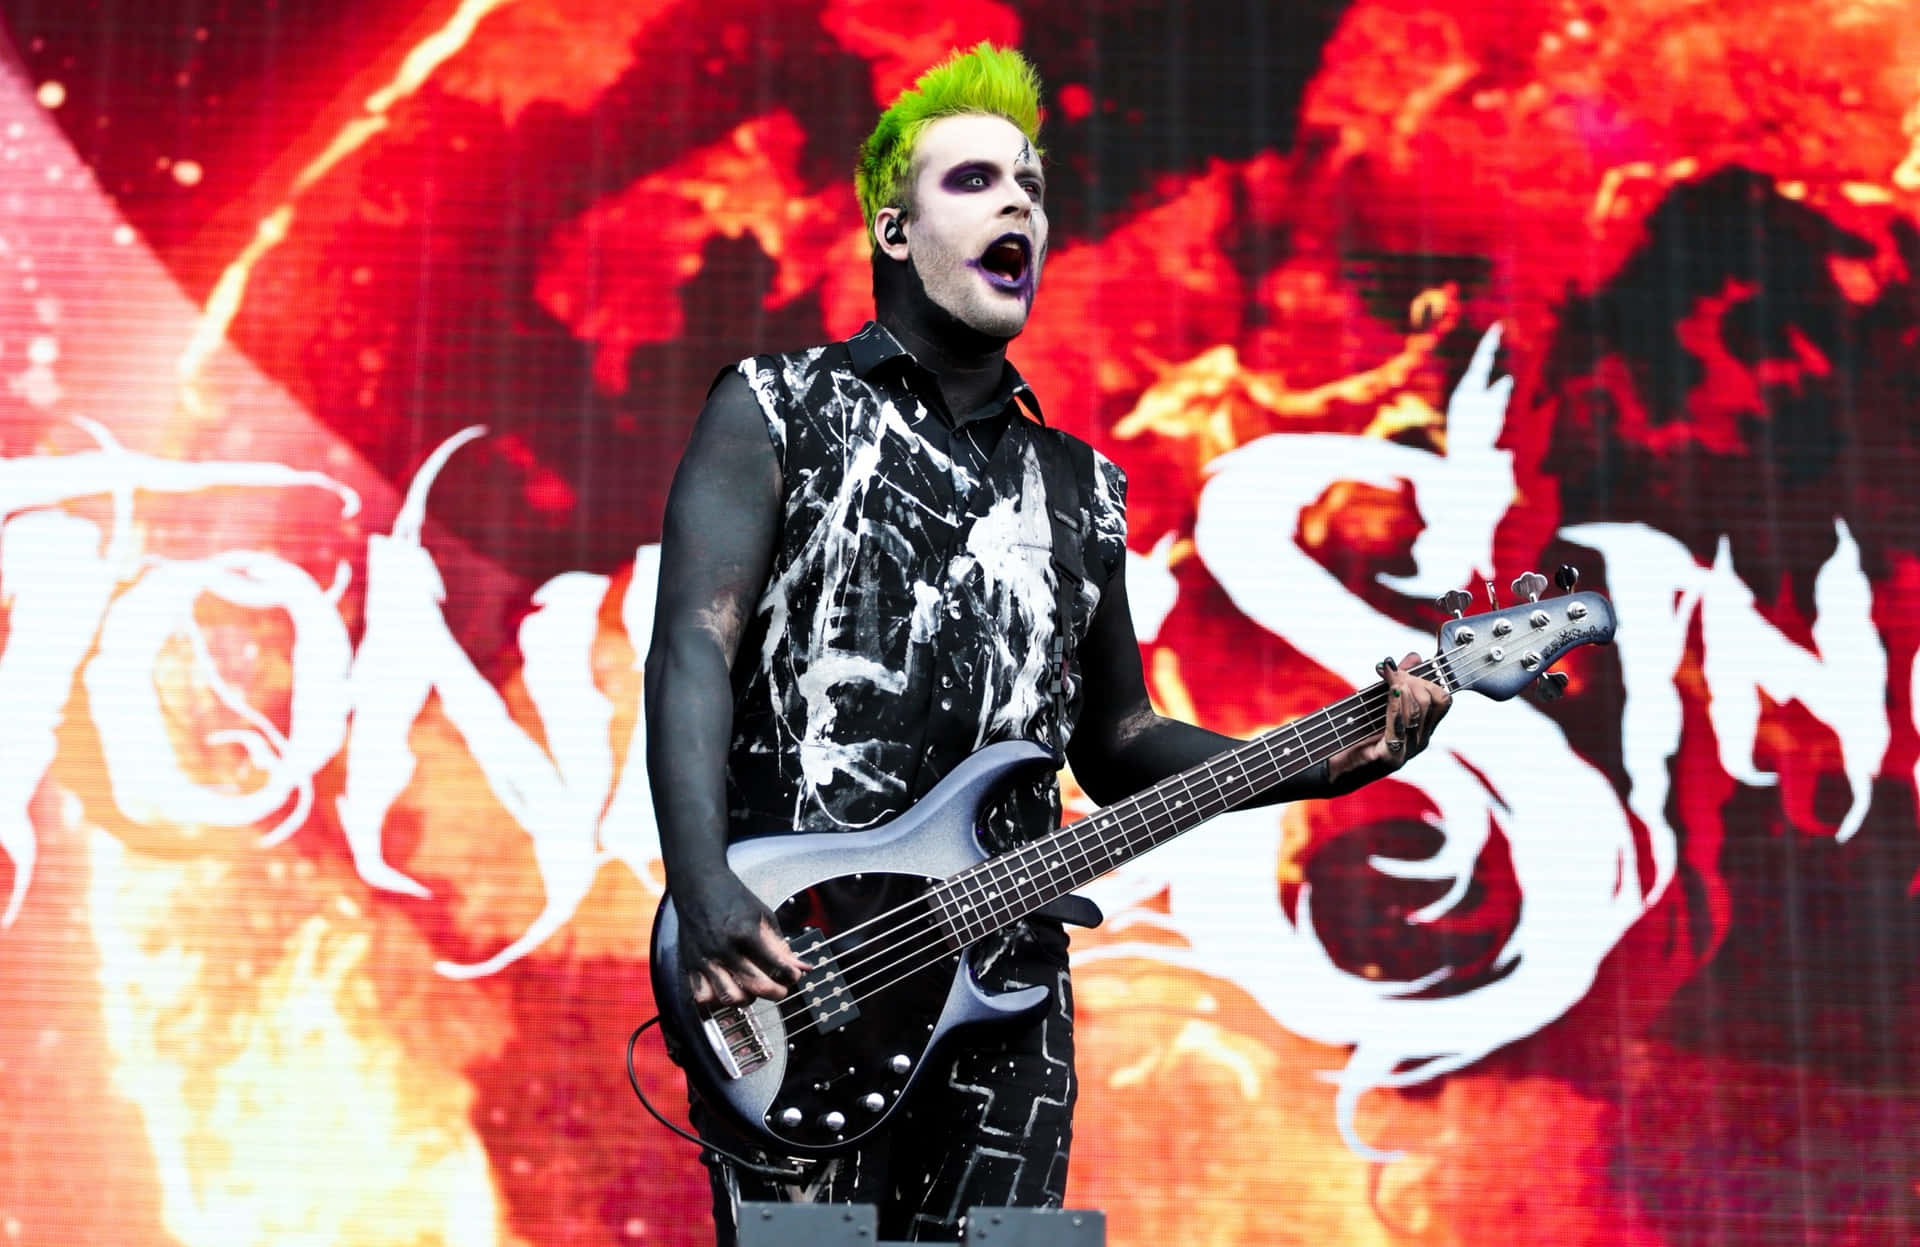 Green Haired Bassist On Stage.jpg